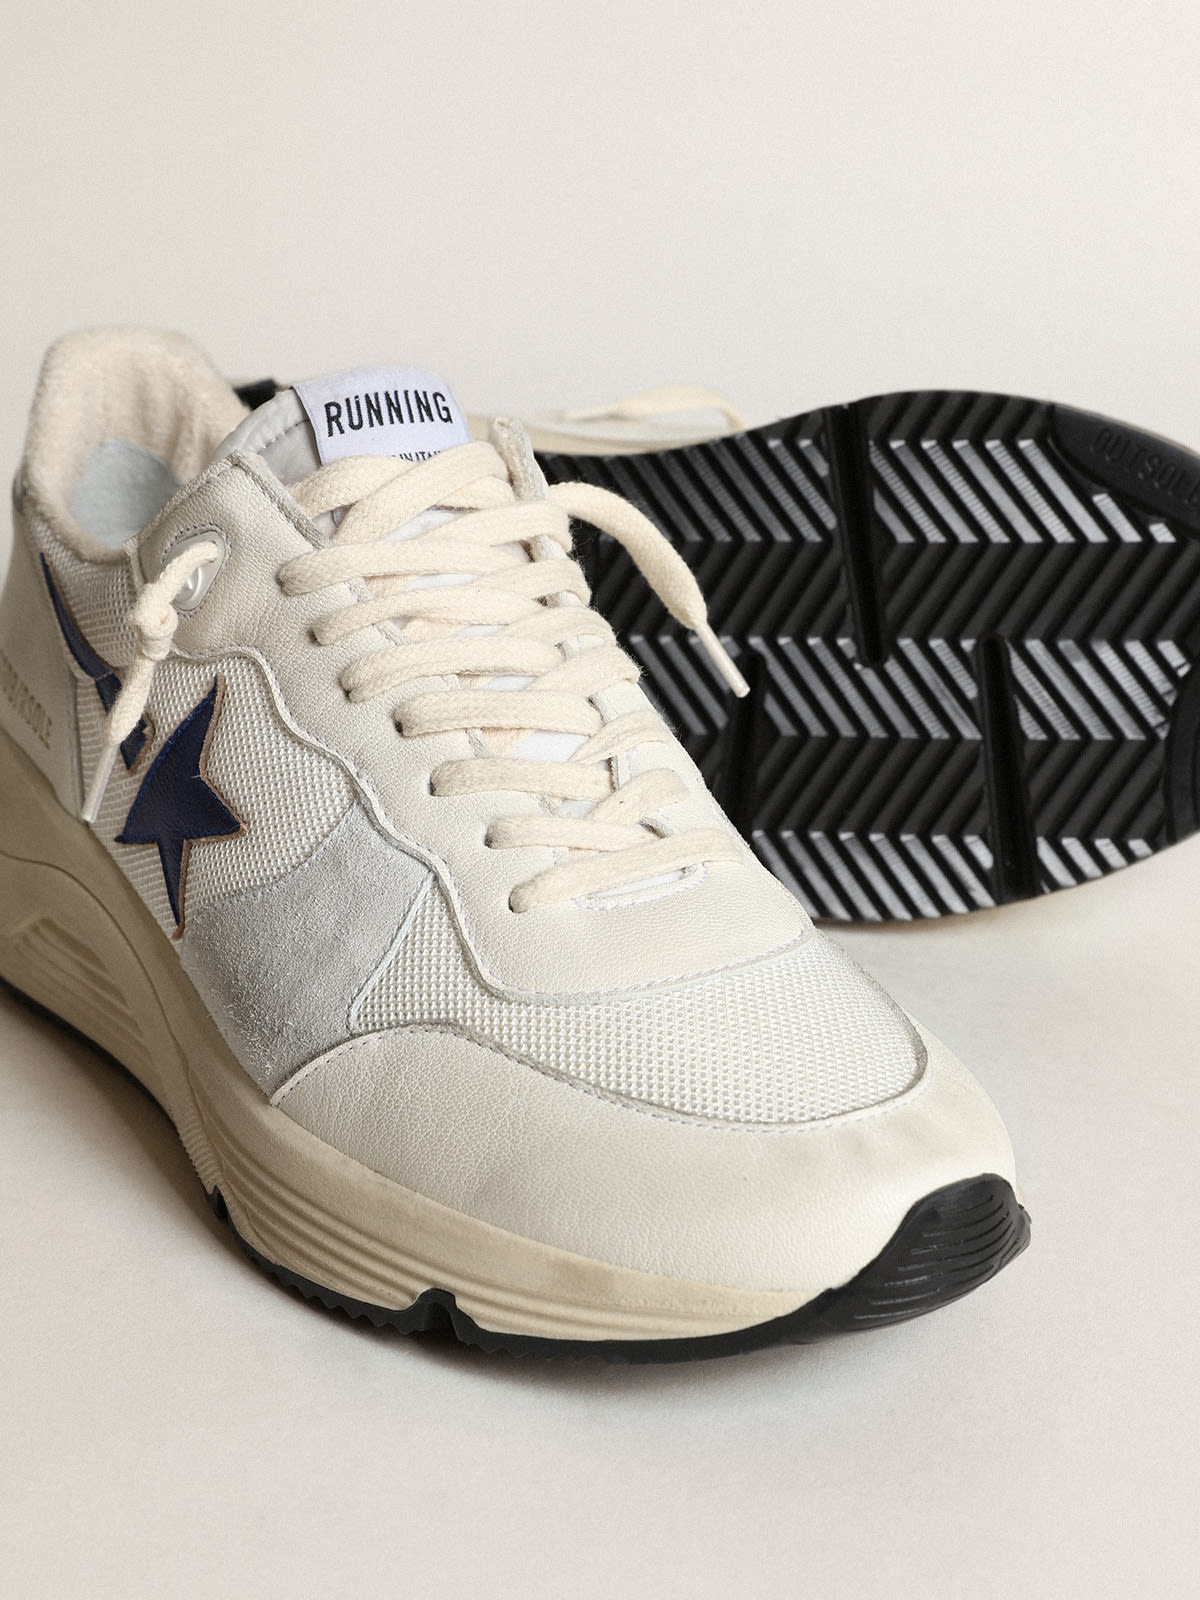 Running Sole in white mesh and nappa leather with a blue star - 4